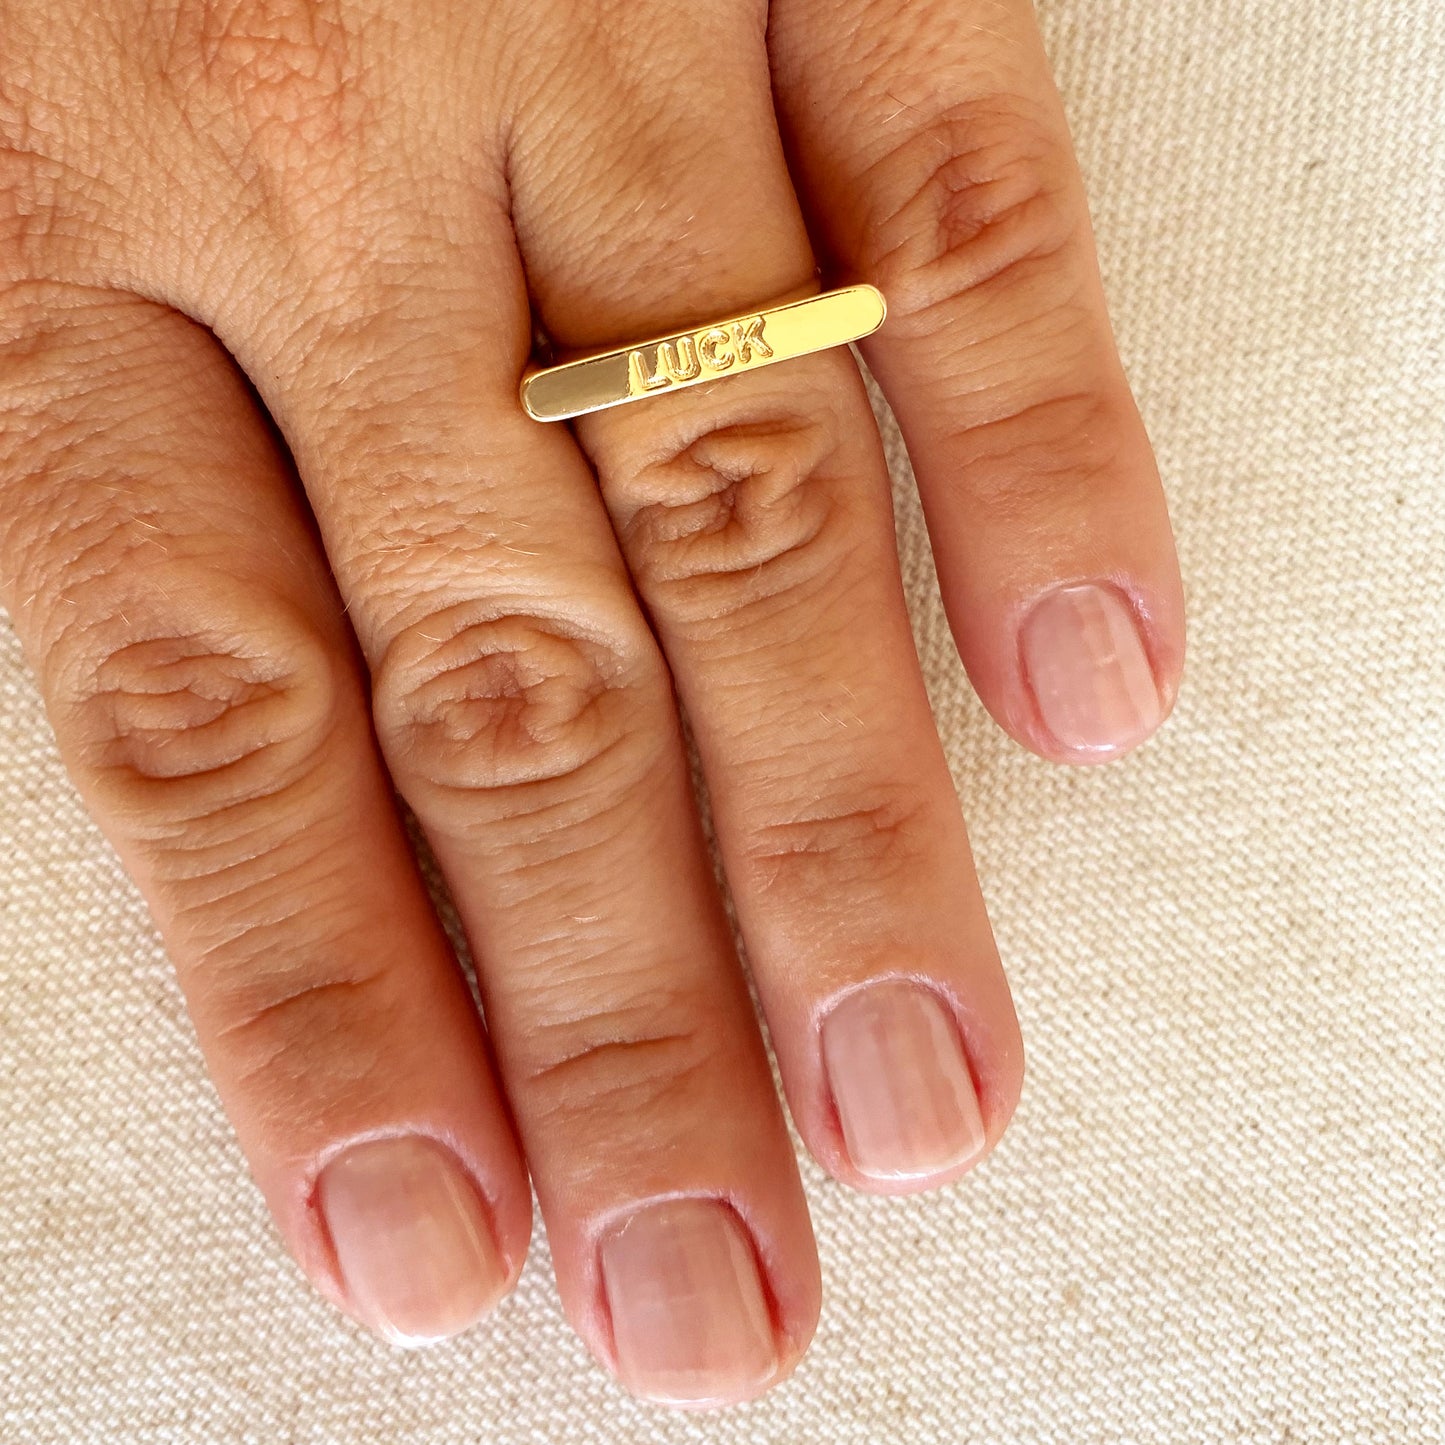 GoldFi 18k Gold Filled Luck Engraved Stackable Ring